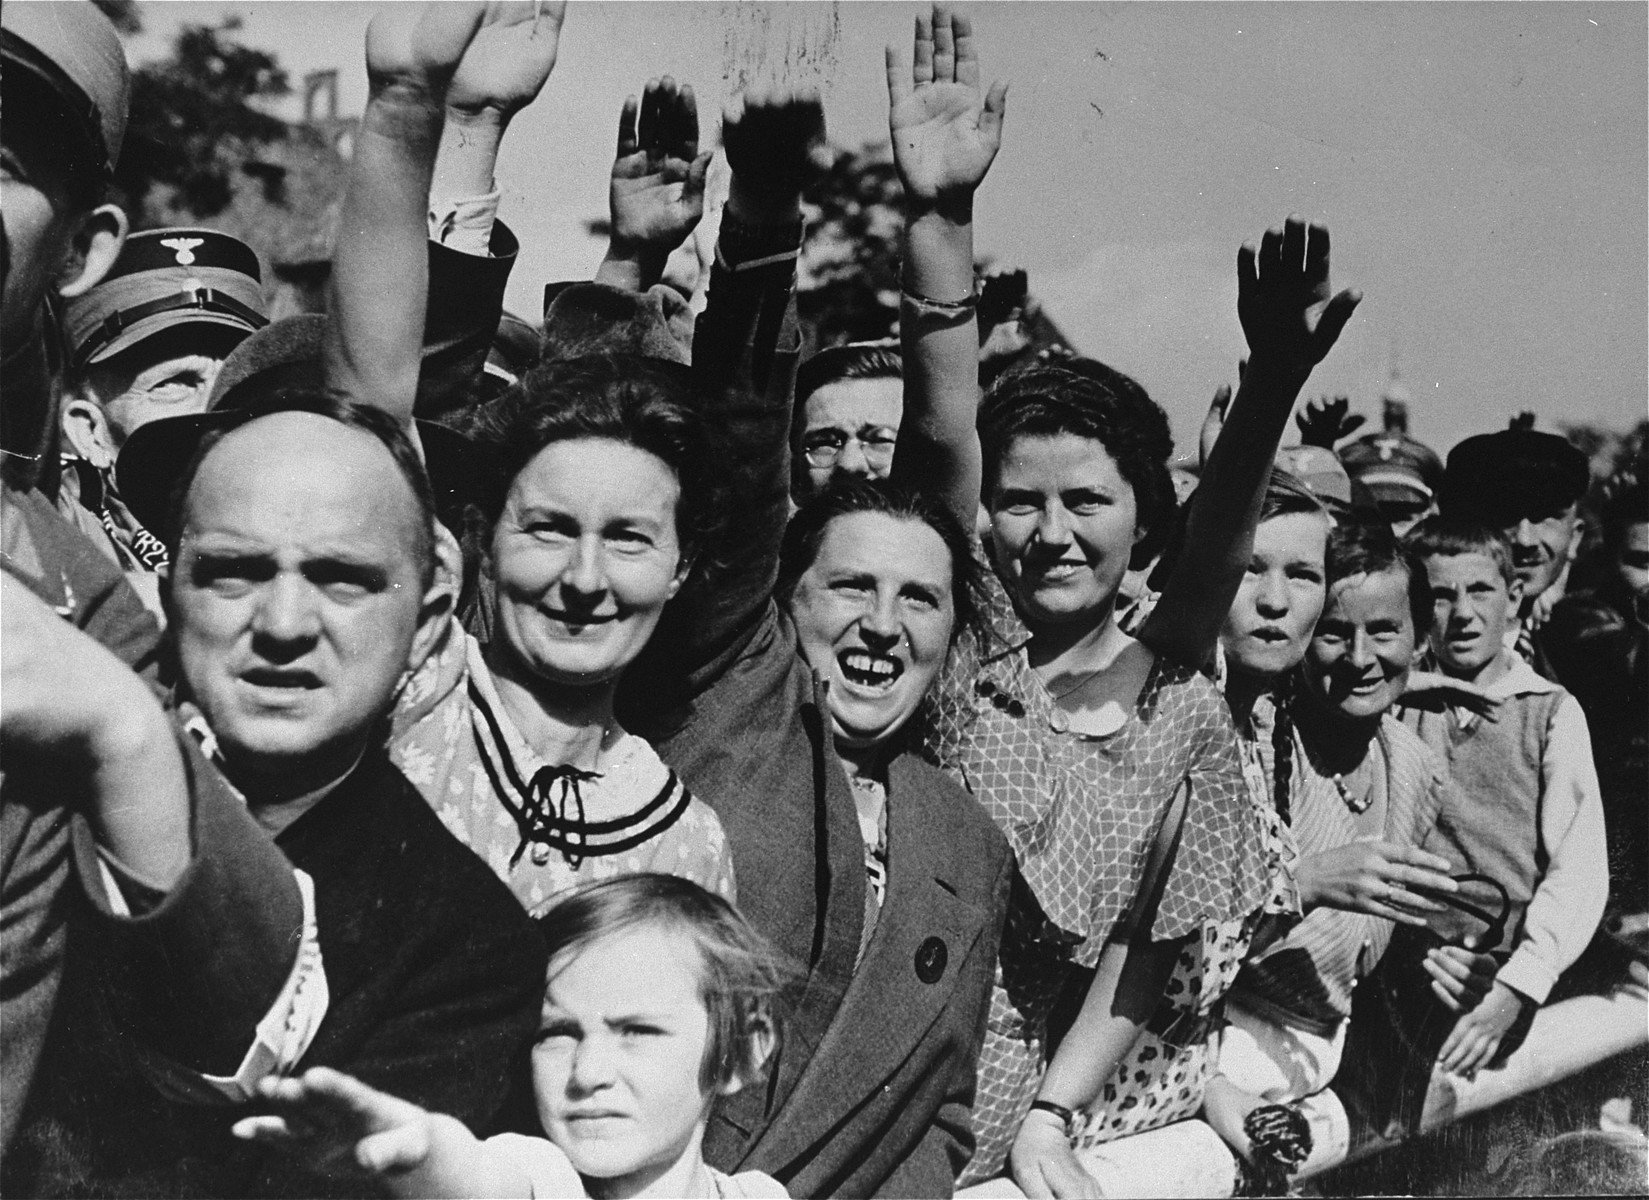 German spectators give the Nazi salute as they watch a Reichsparteitag (Reich Party Day) parade in Nuremberg.